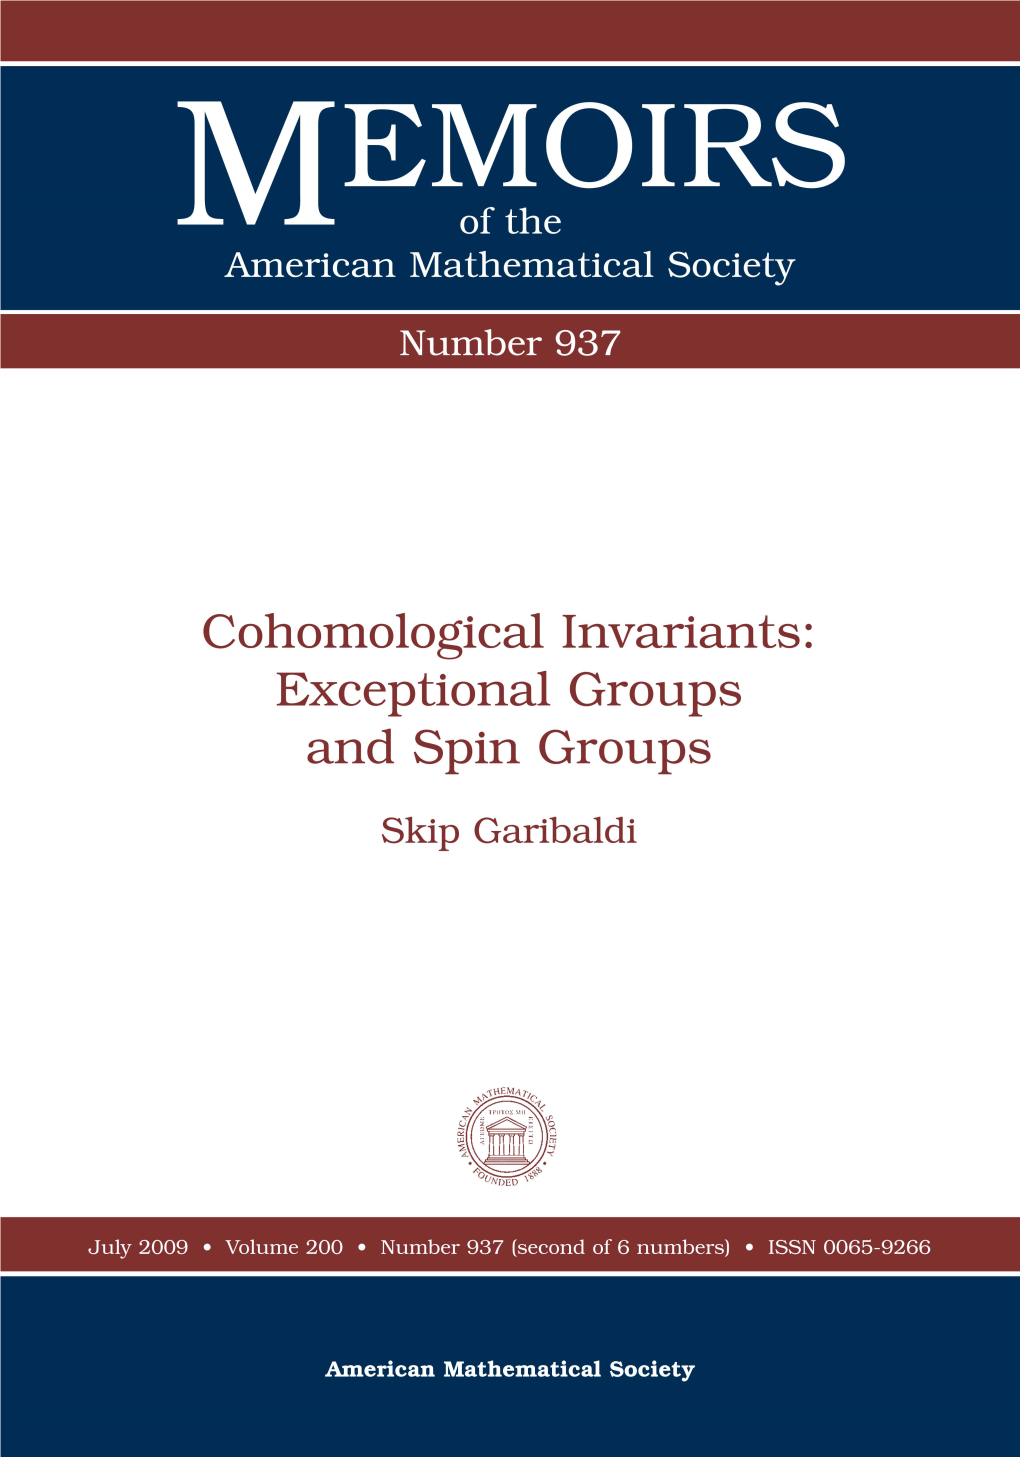 Garibaldi S. Cohomological Invariants.. Exceptional Groups And